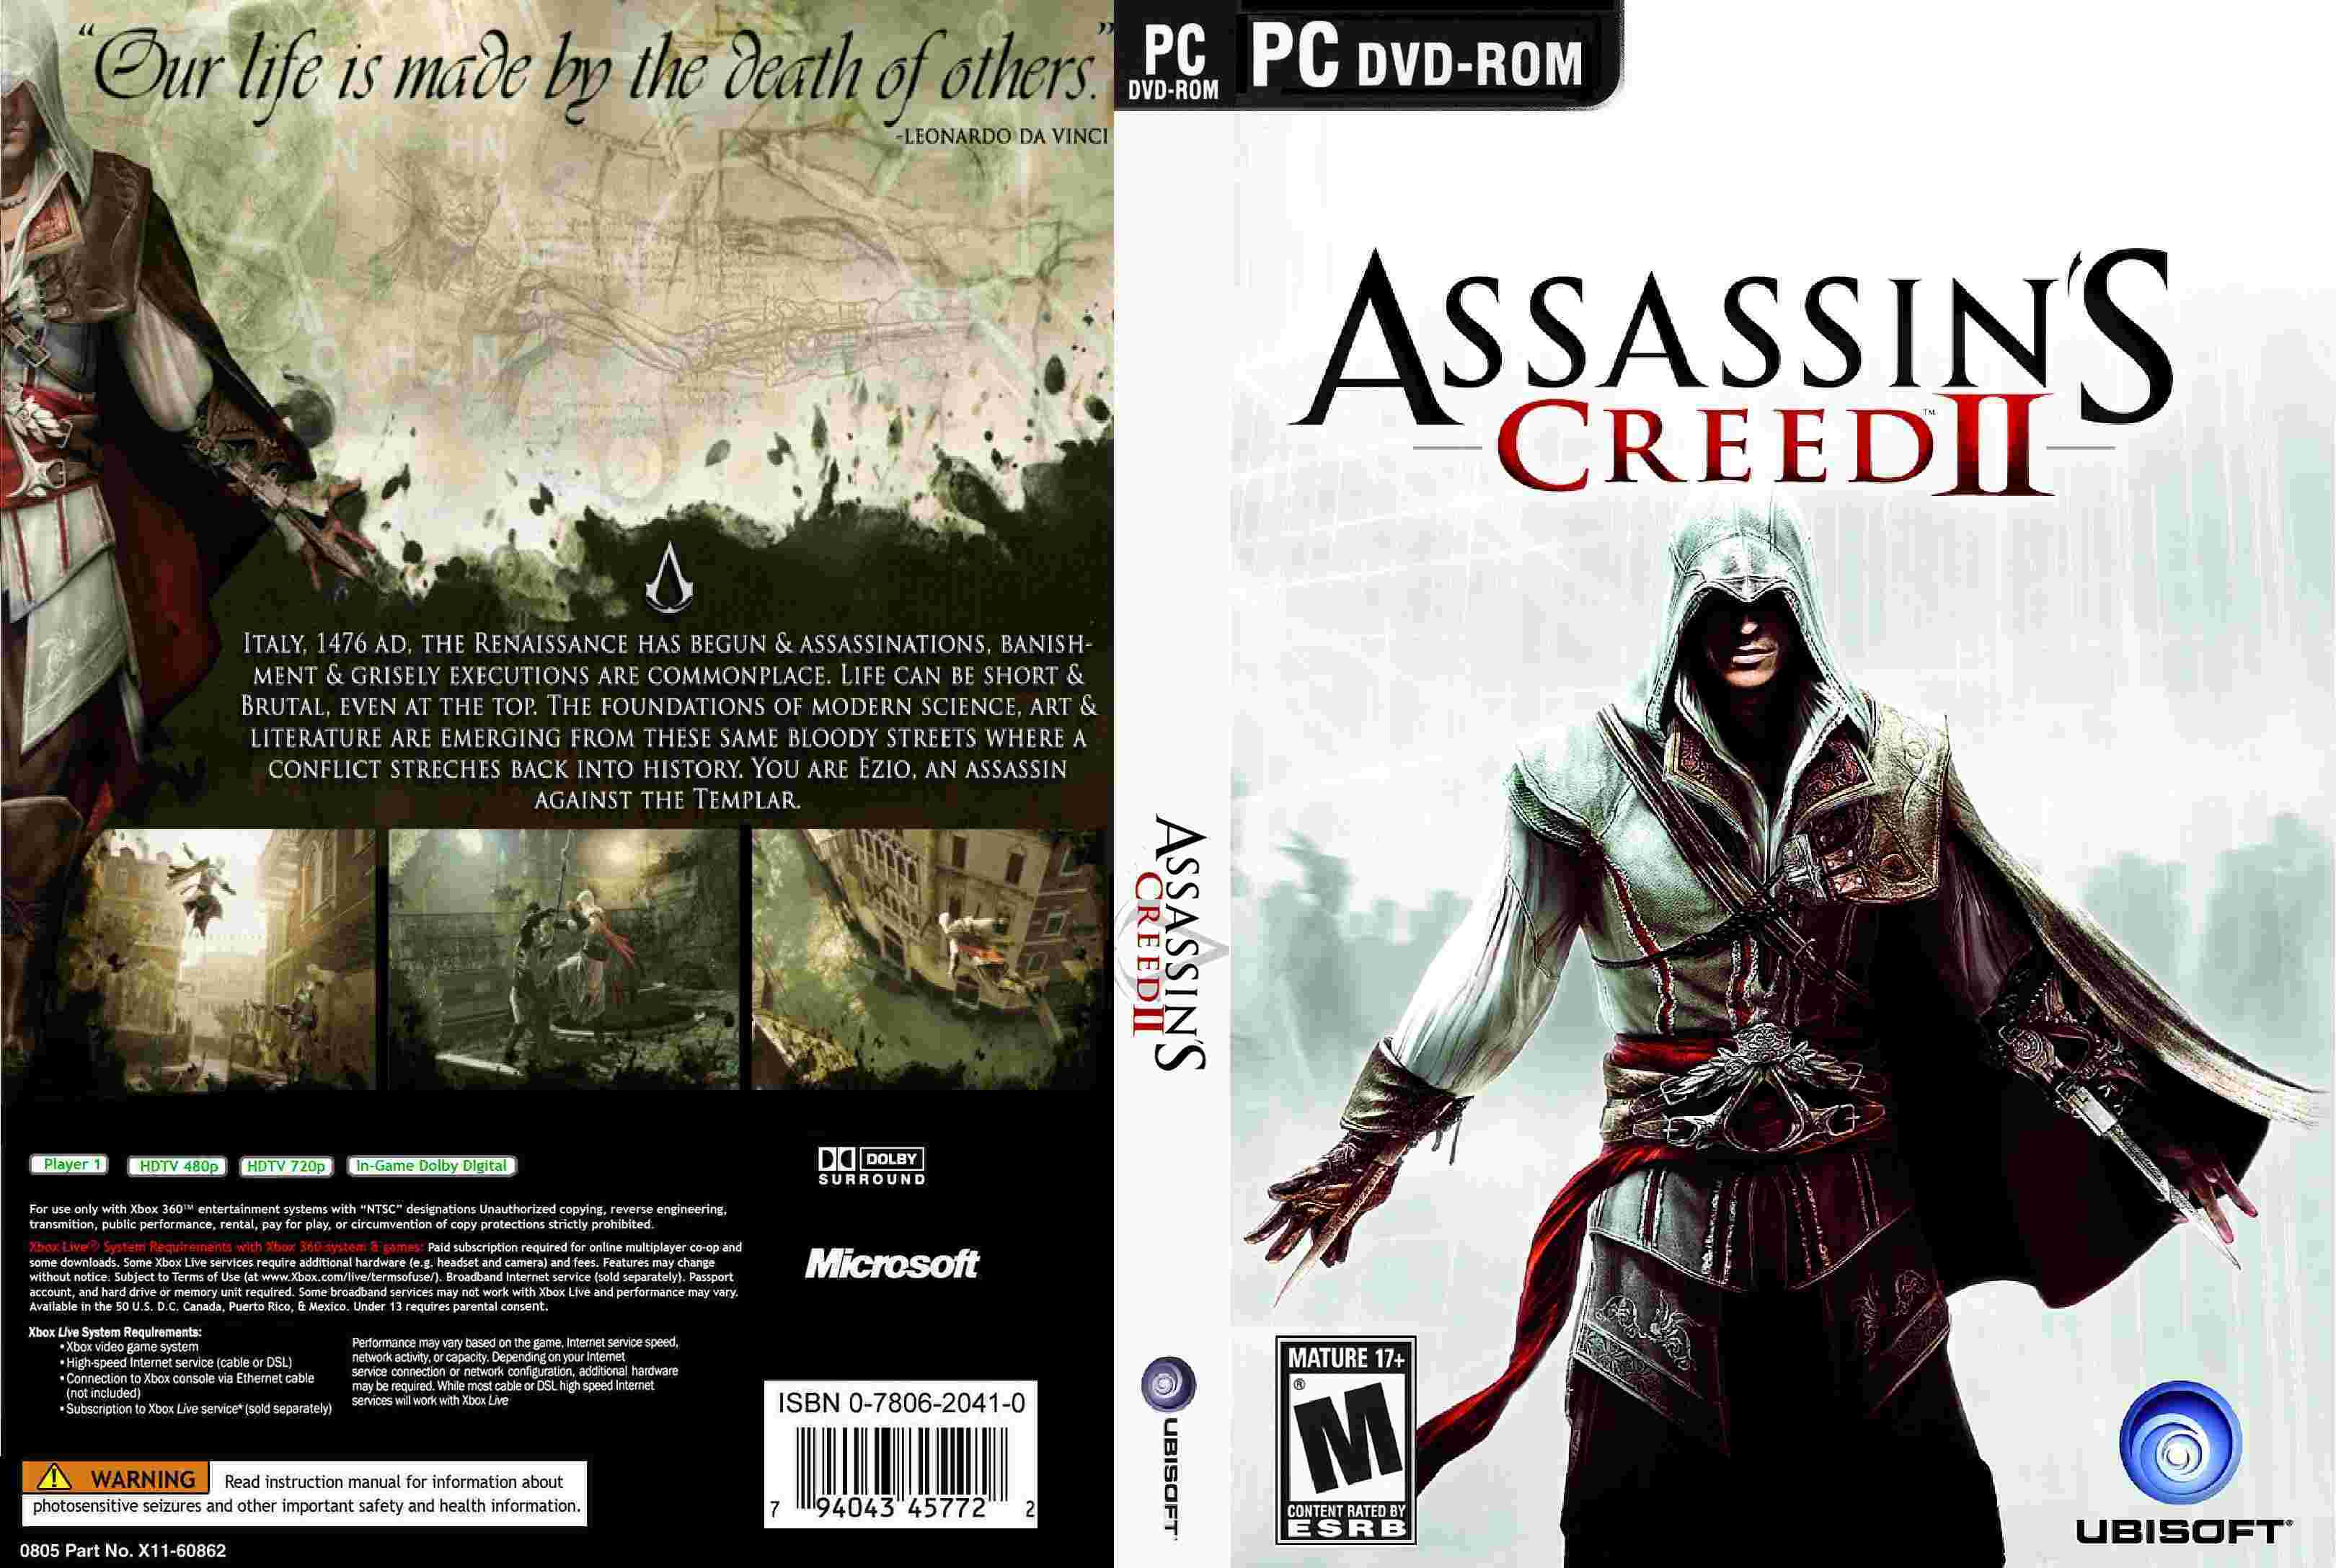 Creed 2 game. Assassins Creed 2 диск. Assassin’s Creed II обложка ps3. Assassin's Creed 2 обложка обложка. Диск игра Assassin's Creed 2 PC.